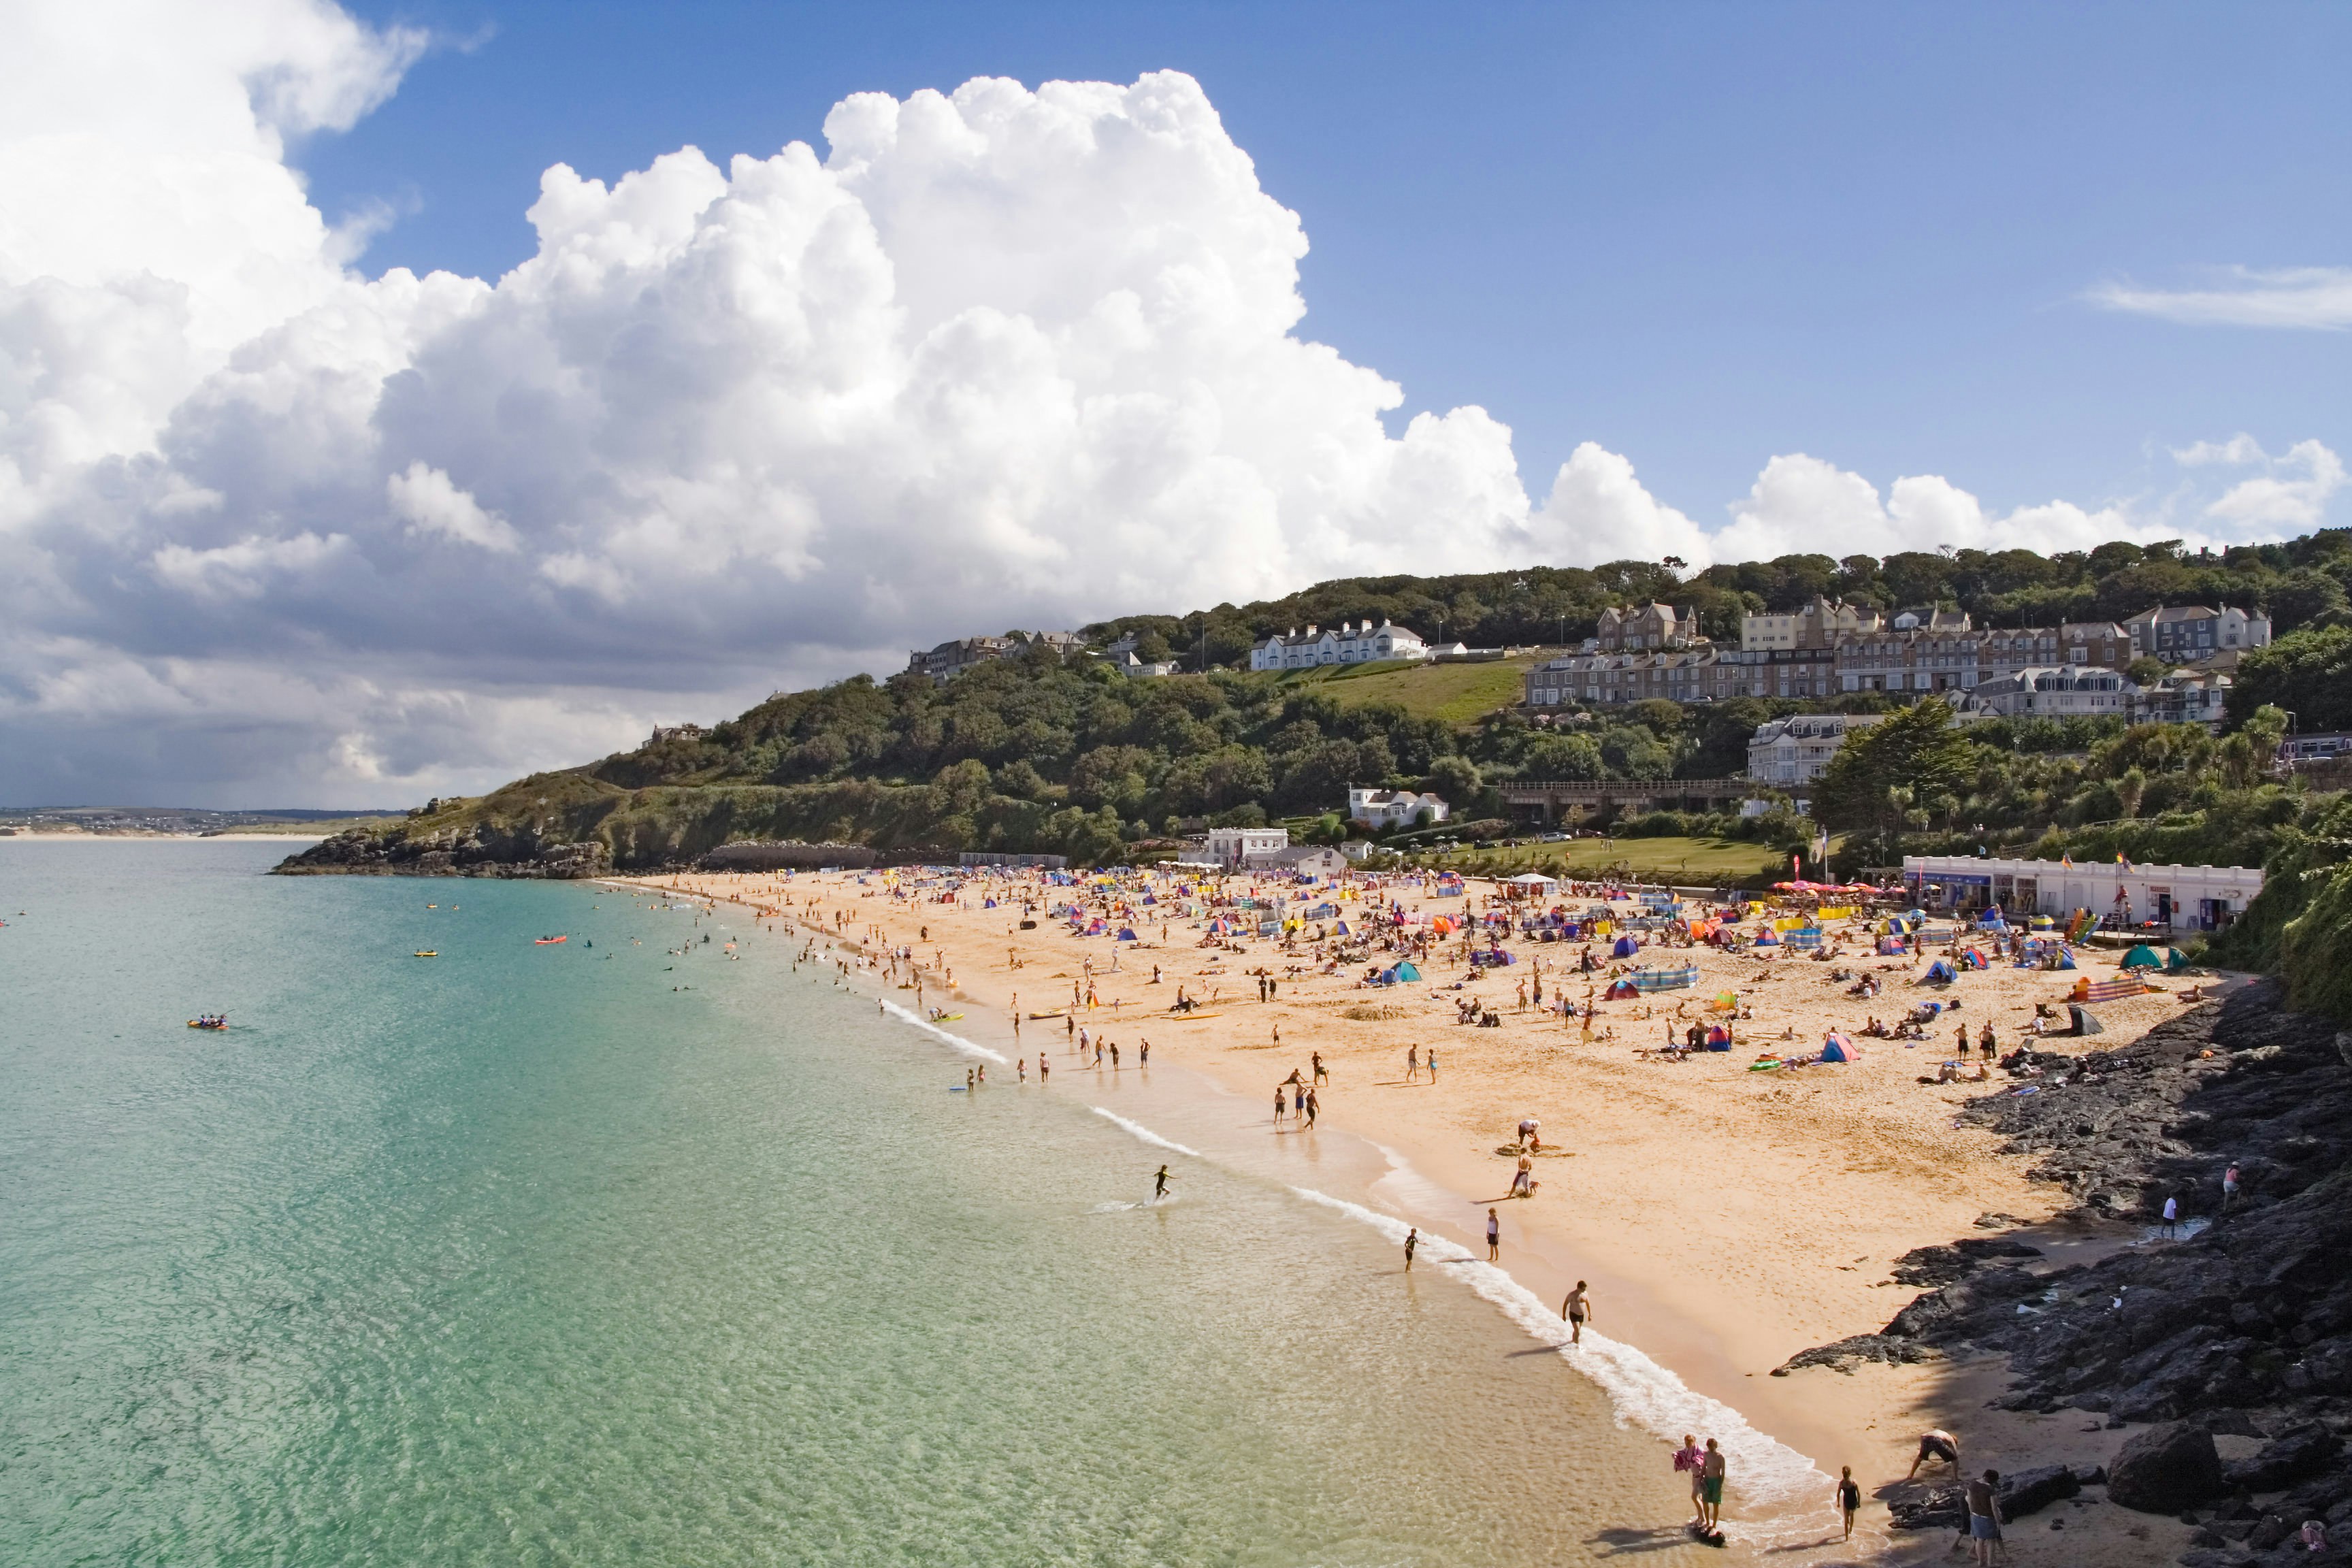 An aerial view of Porthminster beach in St Ives, Cornwall. The turquoise waters lap against the bright white sand, which is busy with sun seekers.